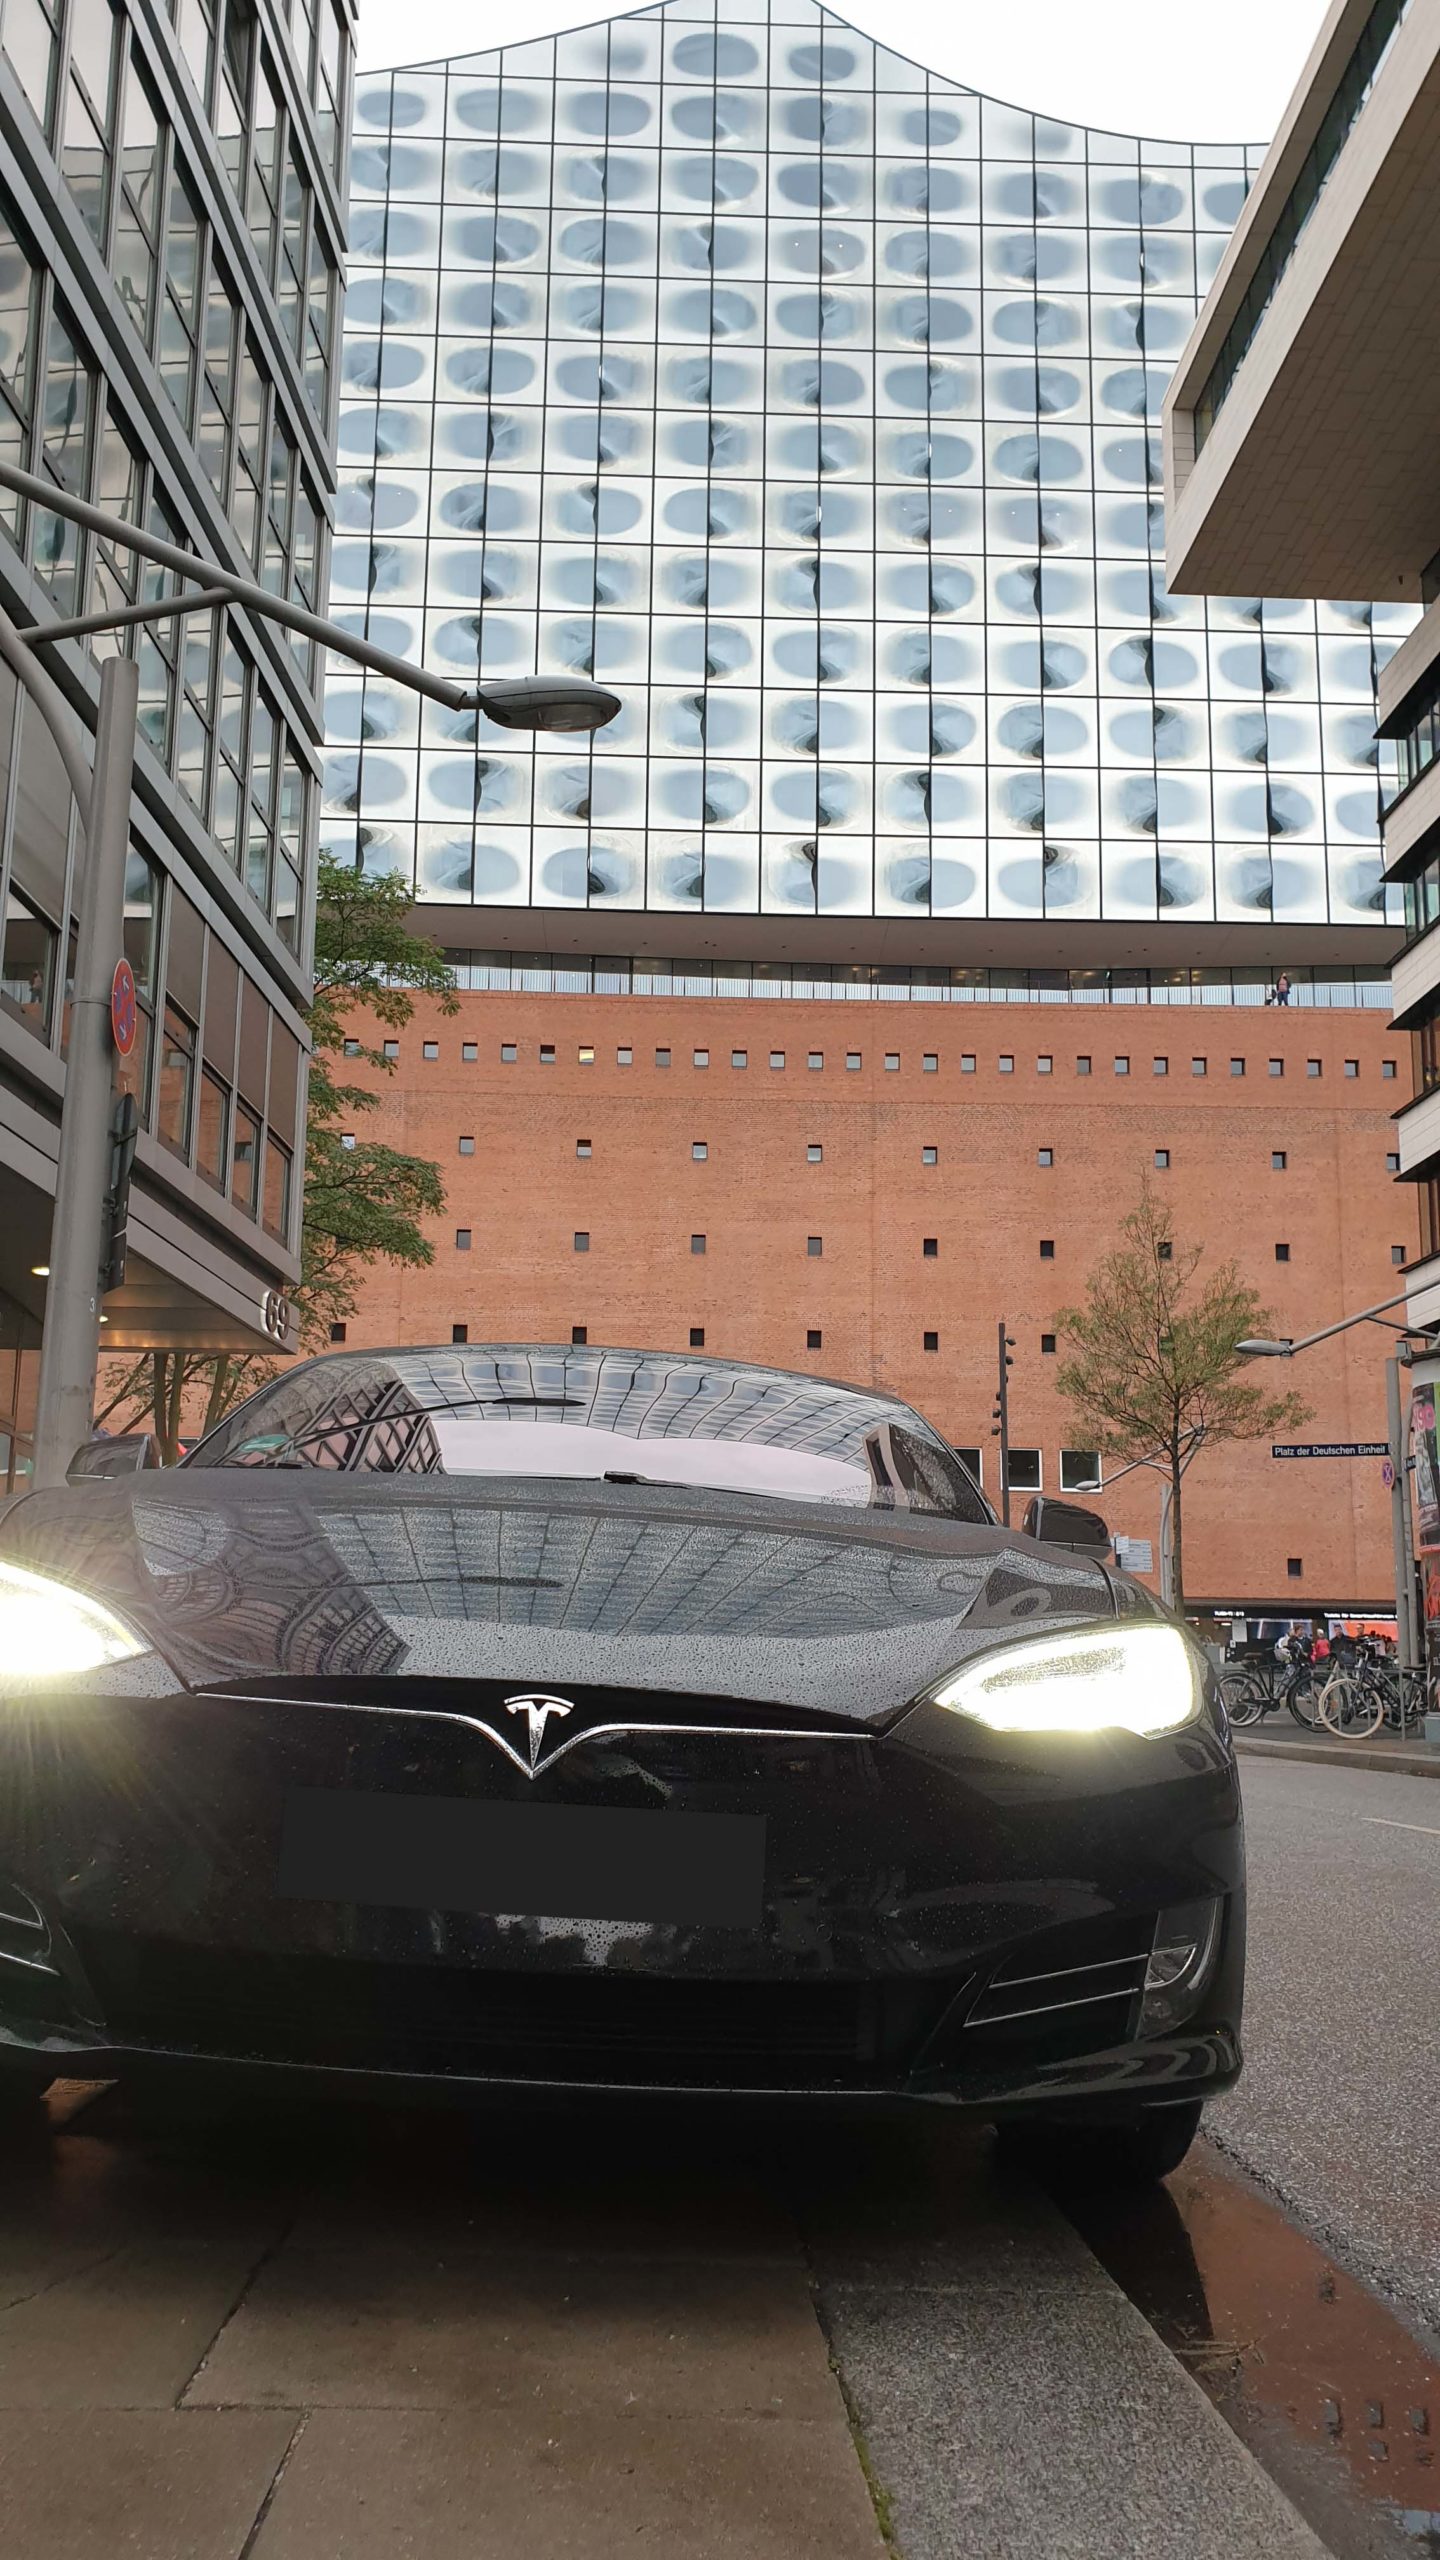 Model S in Hamburg with the Elbphilharmonie the background